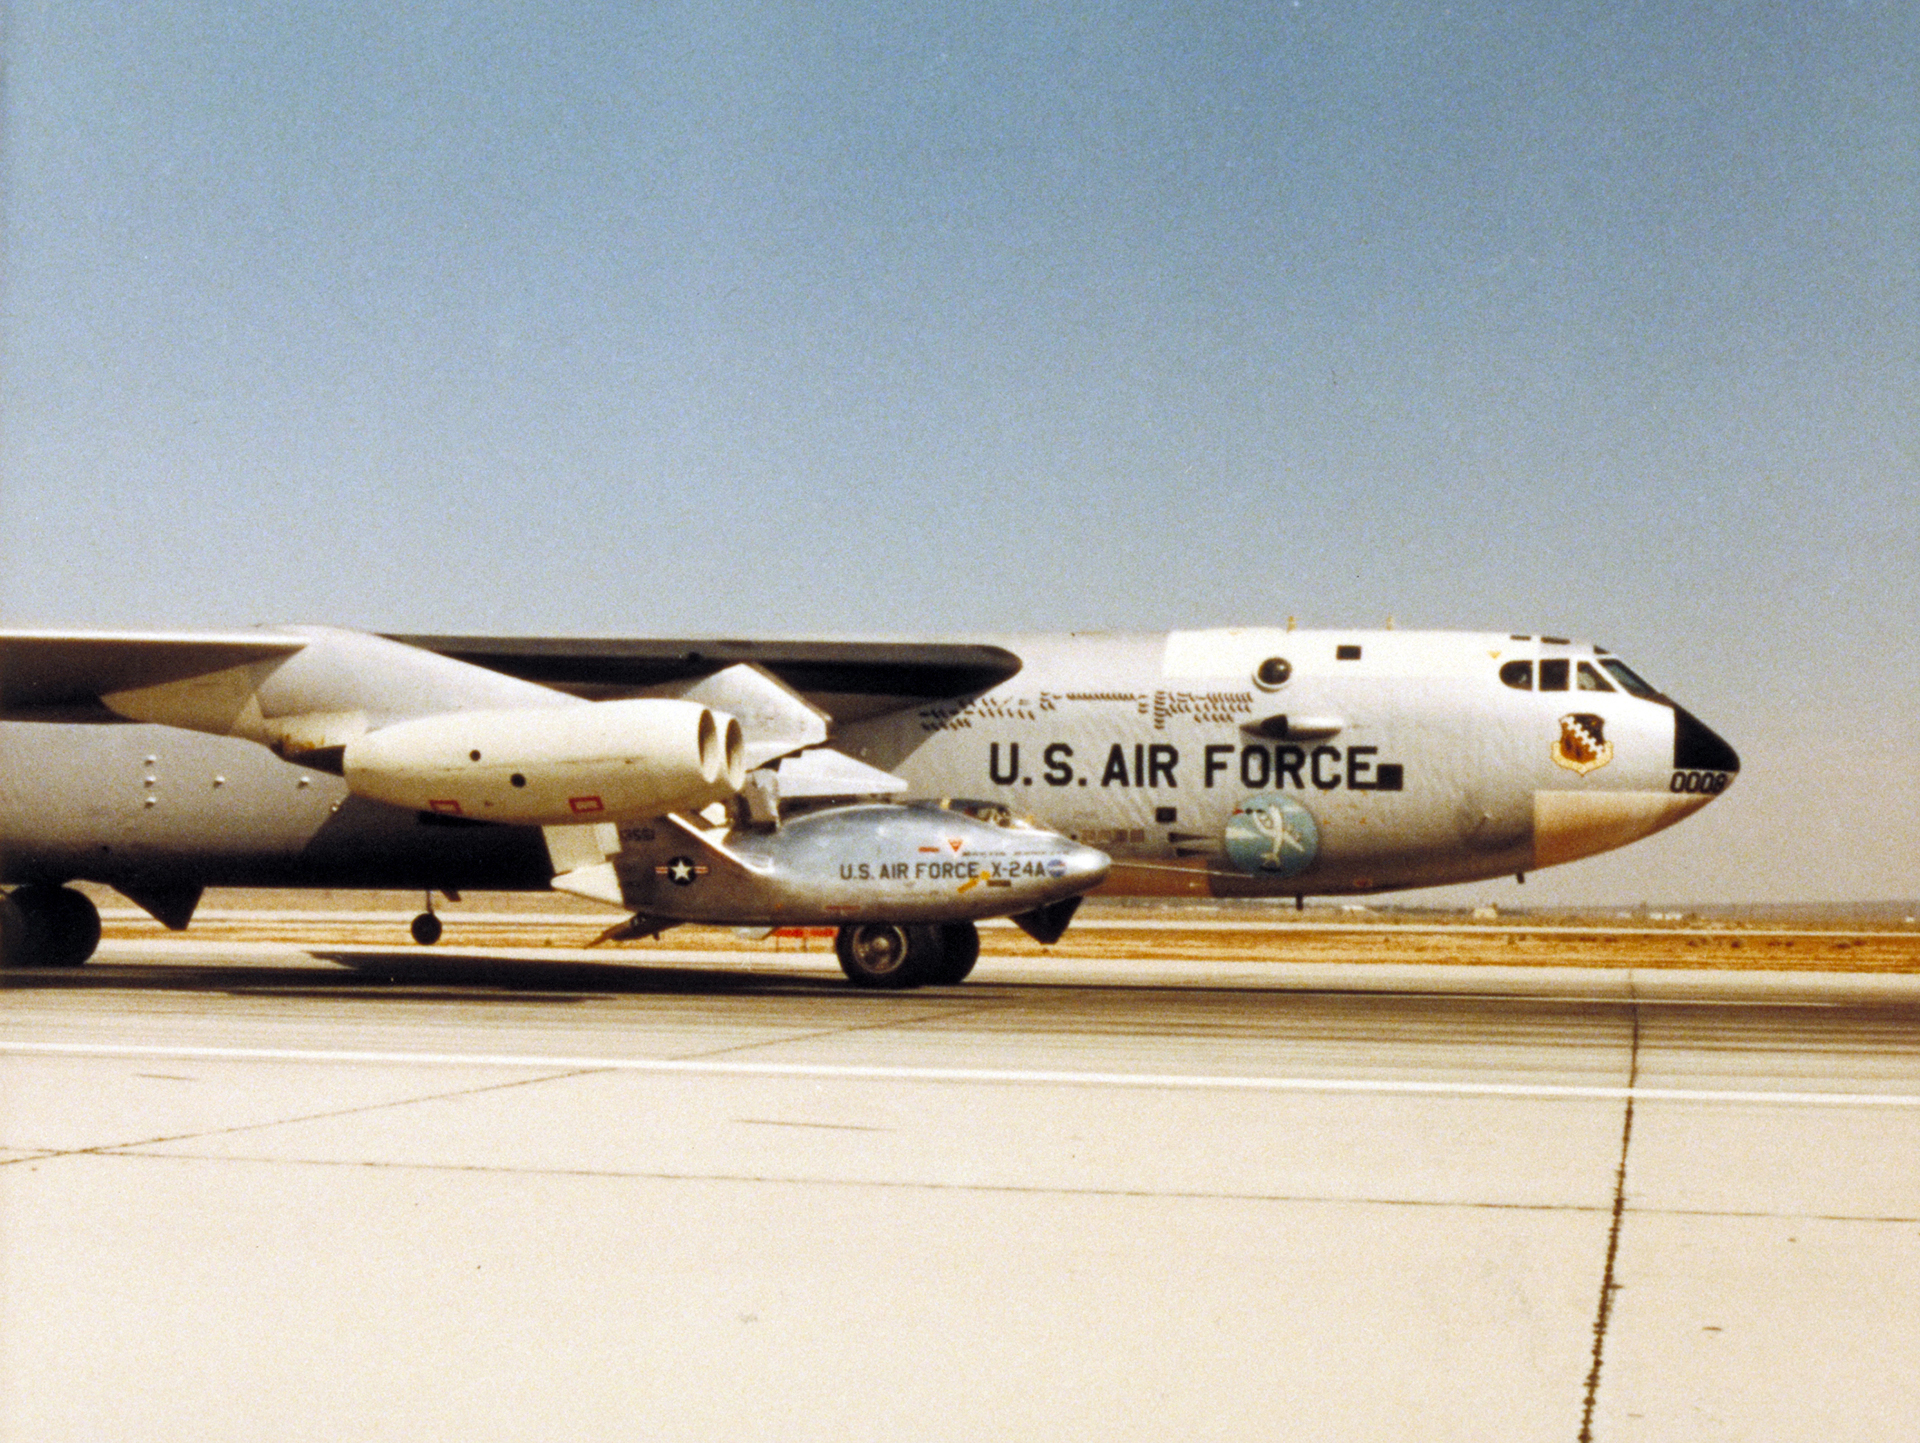 The rocket-powered X-24A lifting body research vehicle with B-52 mother ship.